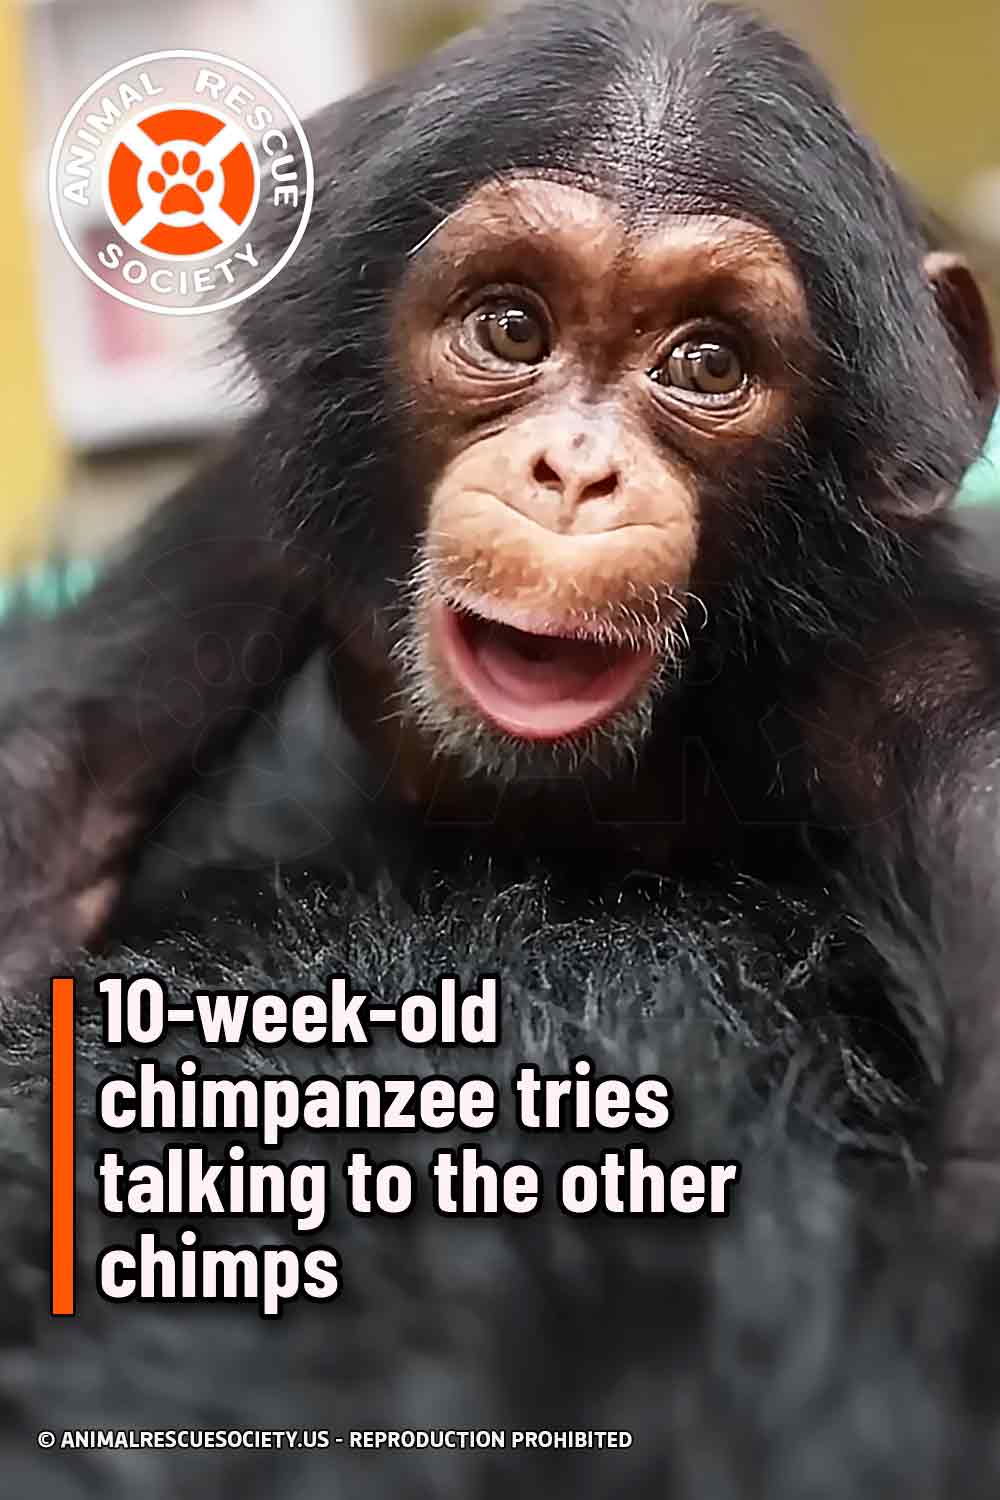 10-week-old chimpanzee tries talking to the other chimps